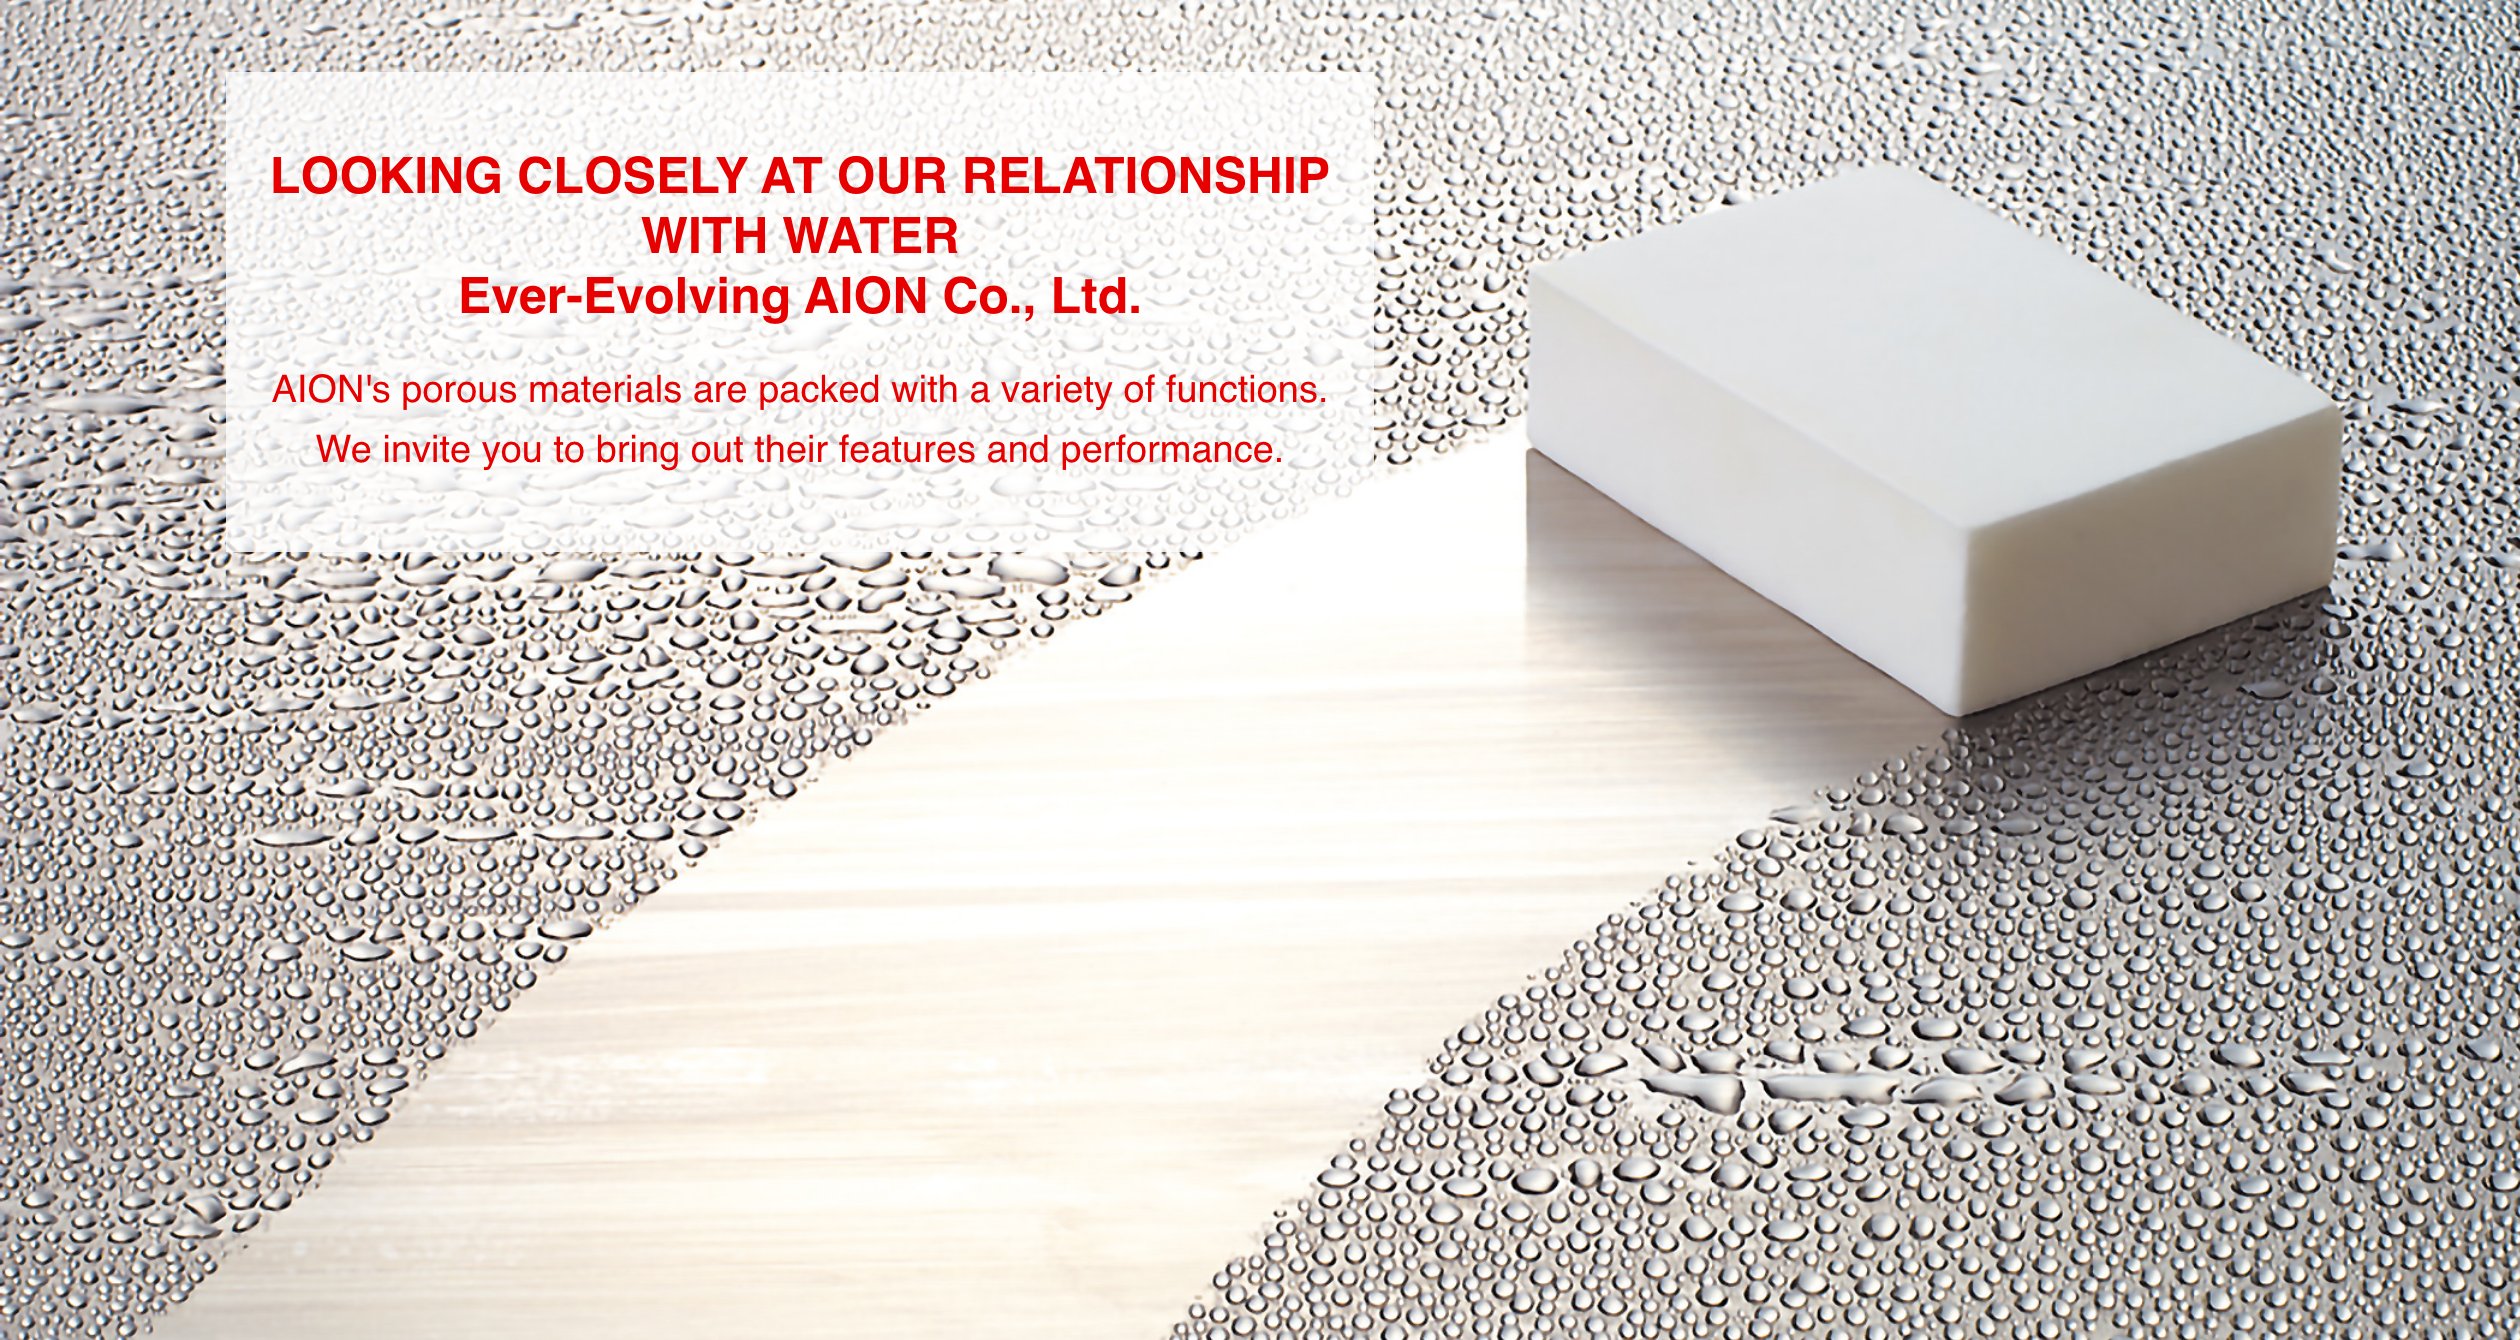 LOOKING CLOSELY AT OUR RELATIONSHIP WITH WATER Ever-Evolving AION Co., Ltd. AION's porous materials are packed with a variety of functions. We invite you to bring out their features and performance.